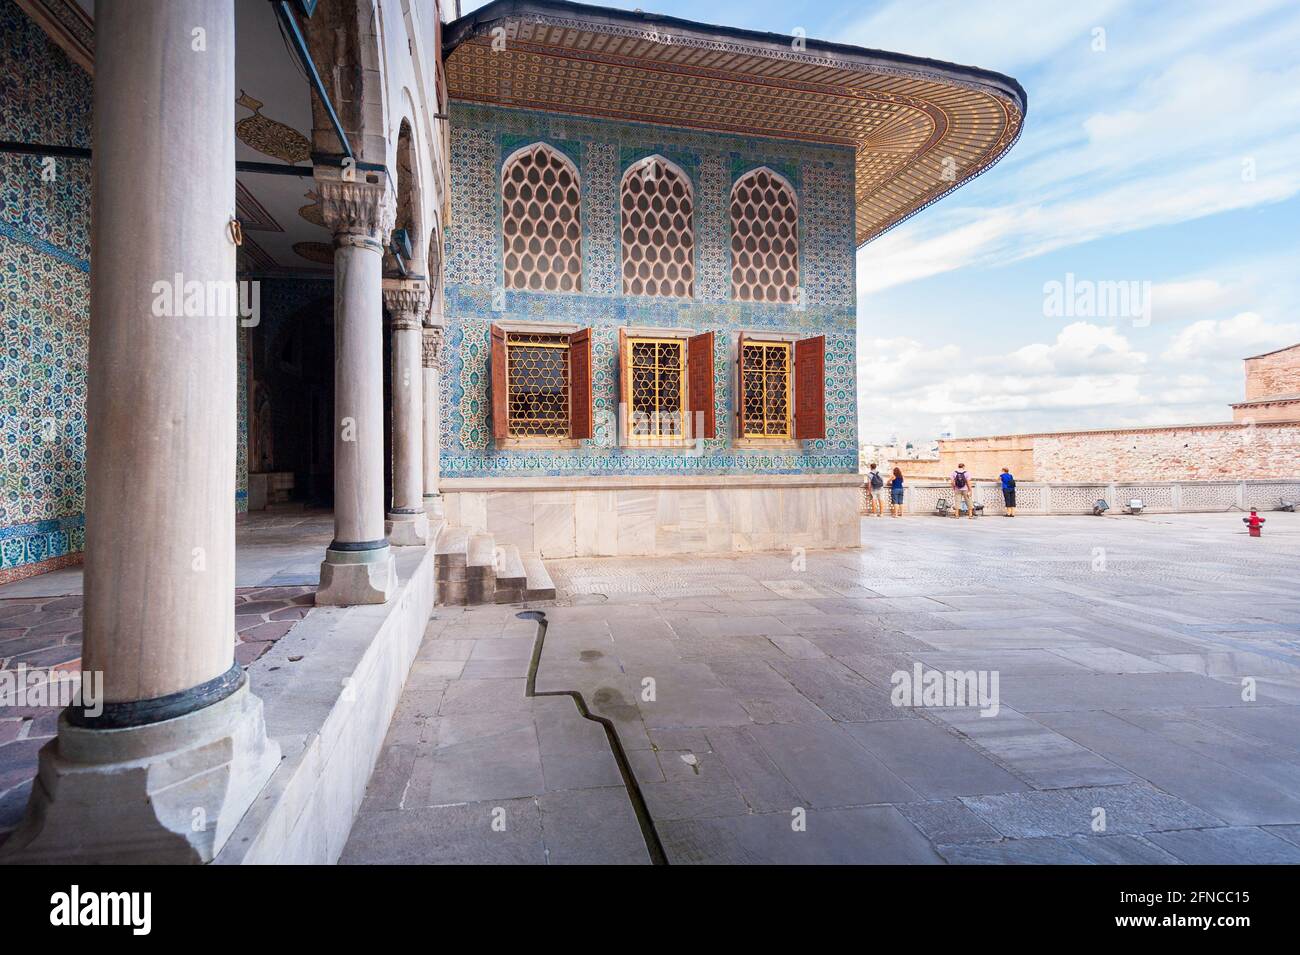 Part of the Imperial Harem Section of the Topkapi Palace Stock Photo